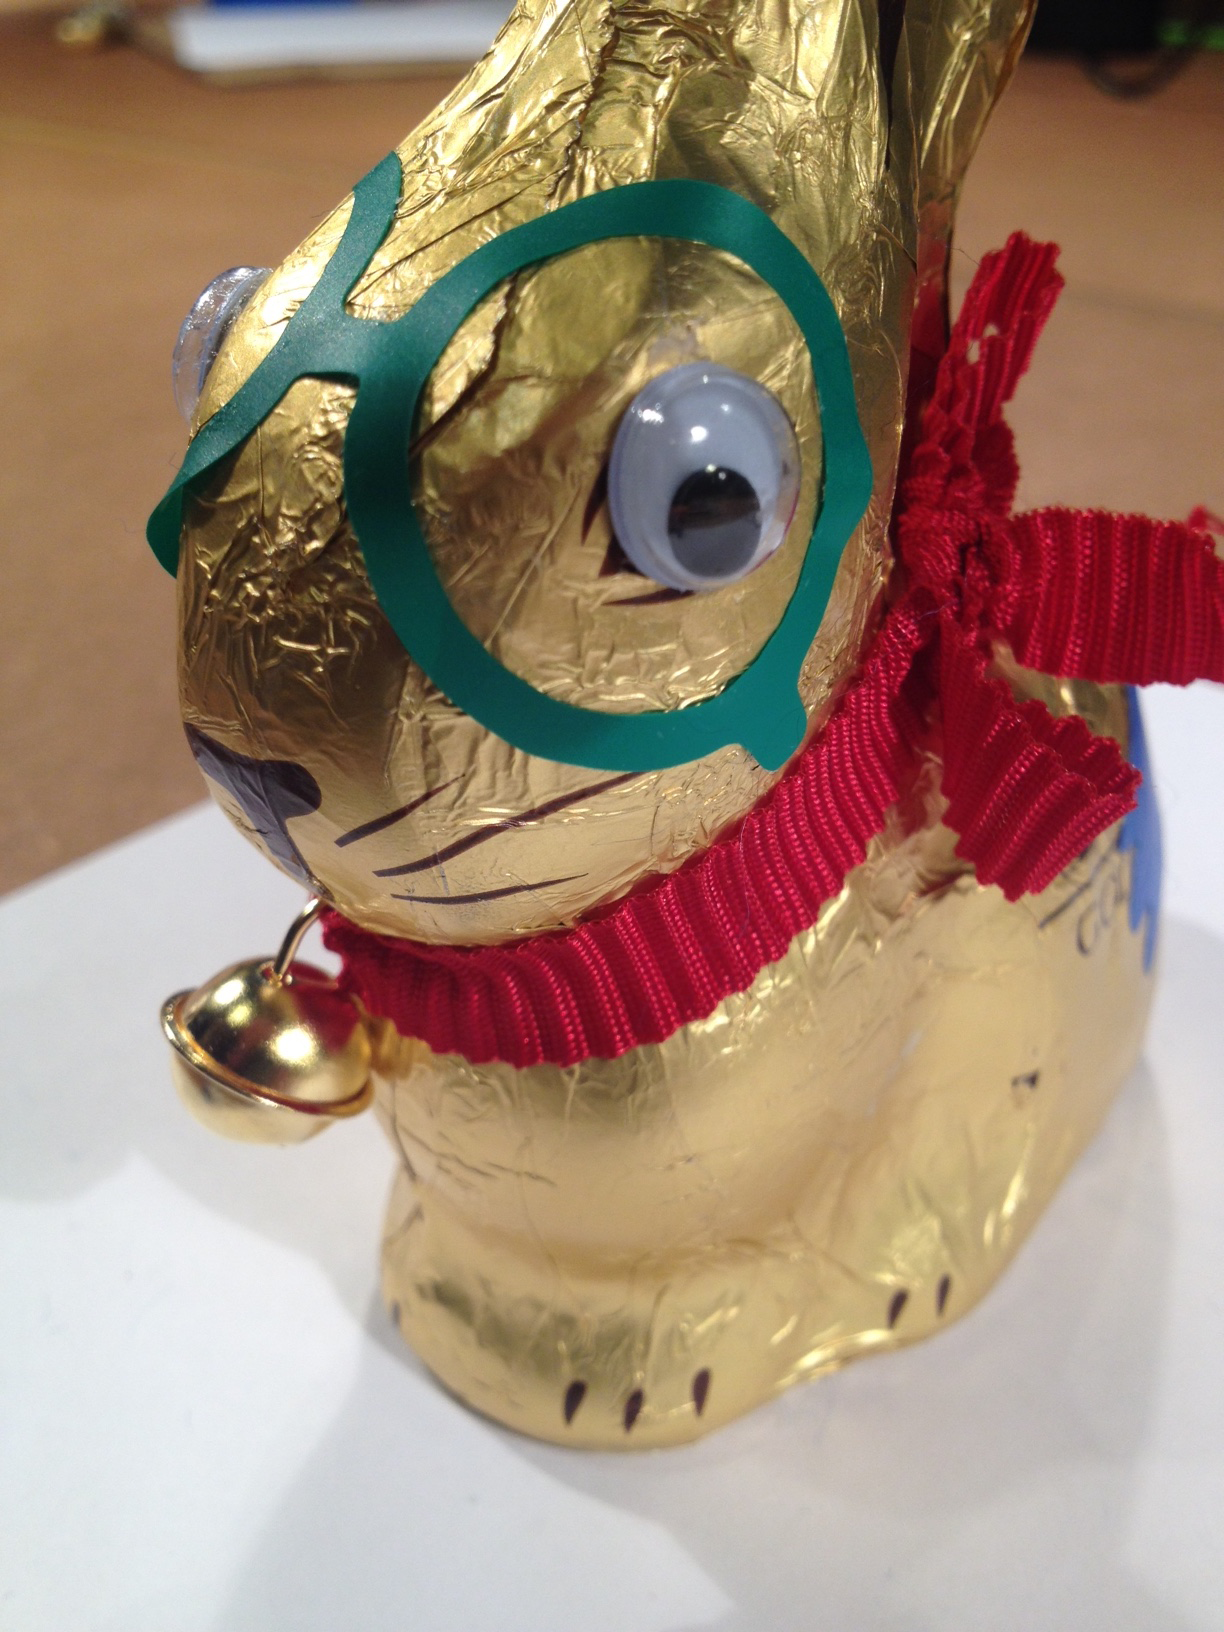 A golden chocolate Easter bunny looks into the camera with its wobbly eyes glued on. Beside the eyes a green sticker similar to glasses is glued on the packaging of the Easter bunny.